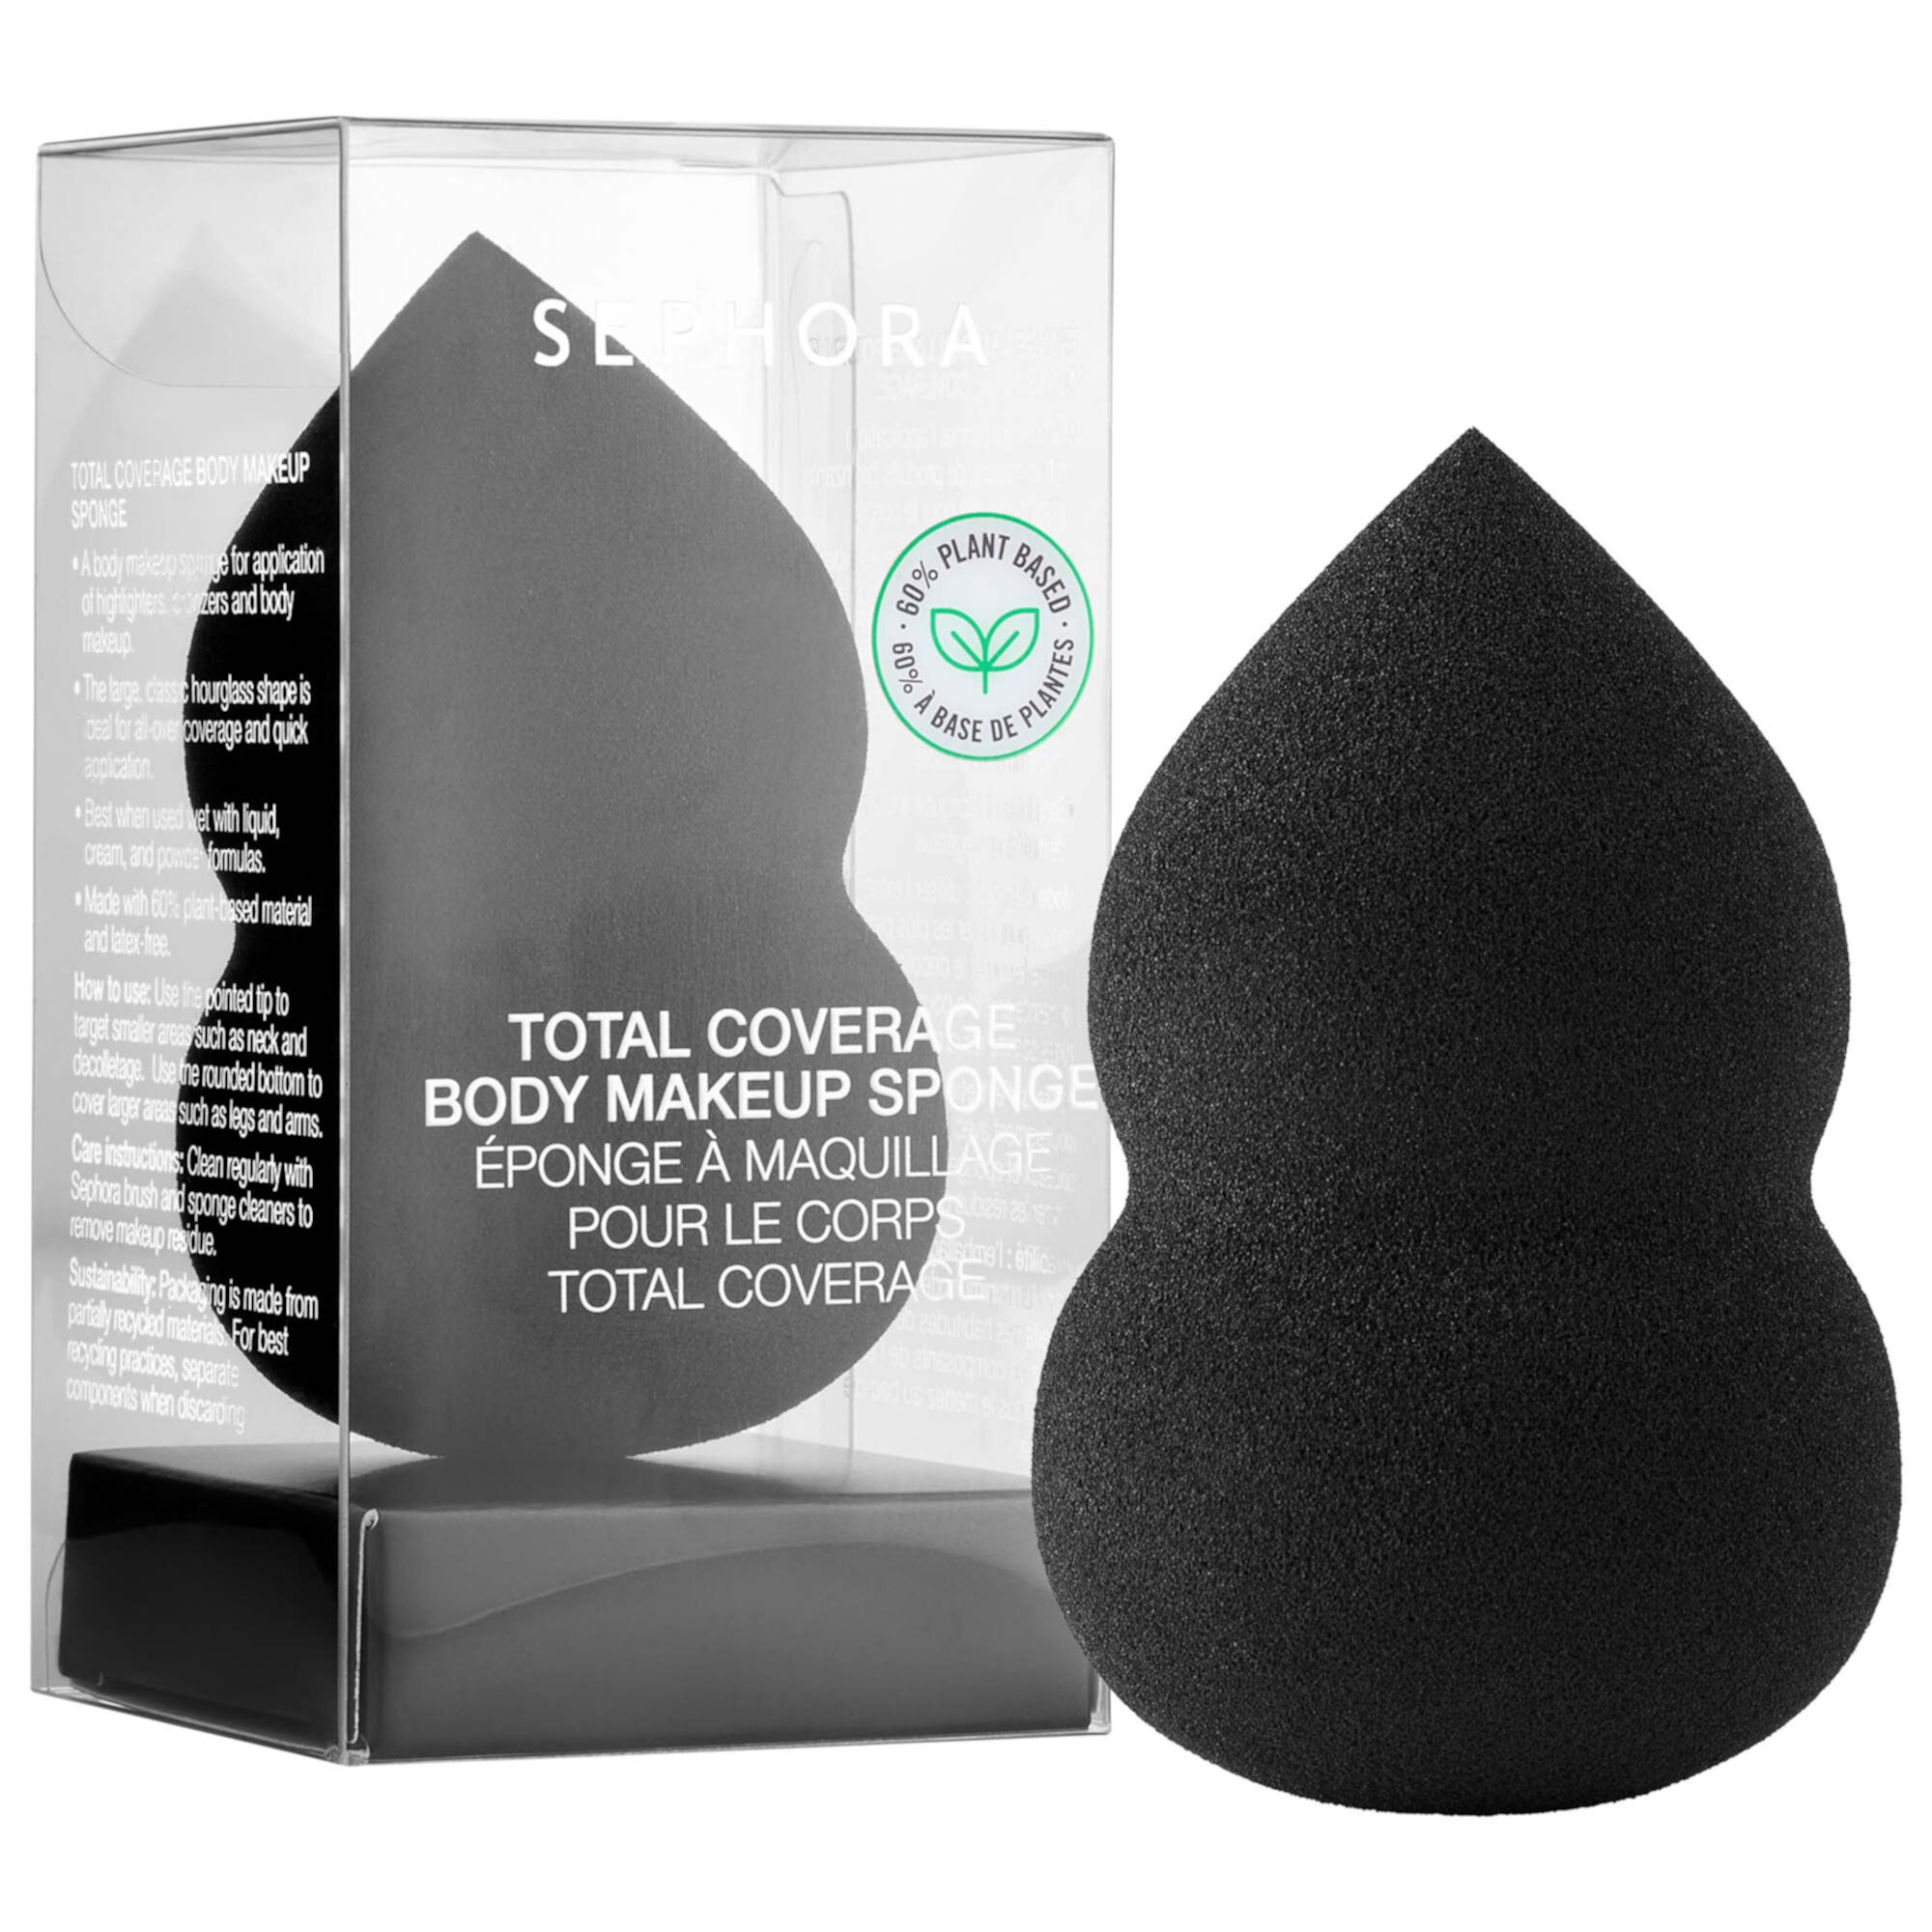 Total Coverage Body Makeup Sponge SEPHORA COLLECTION